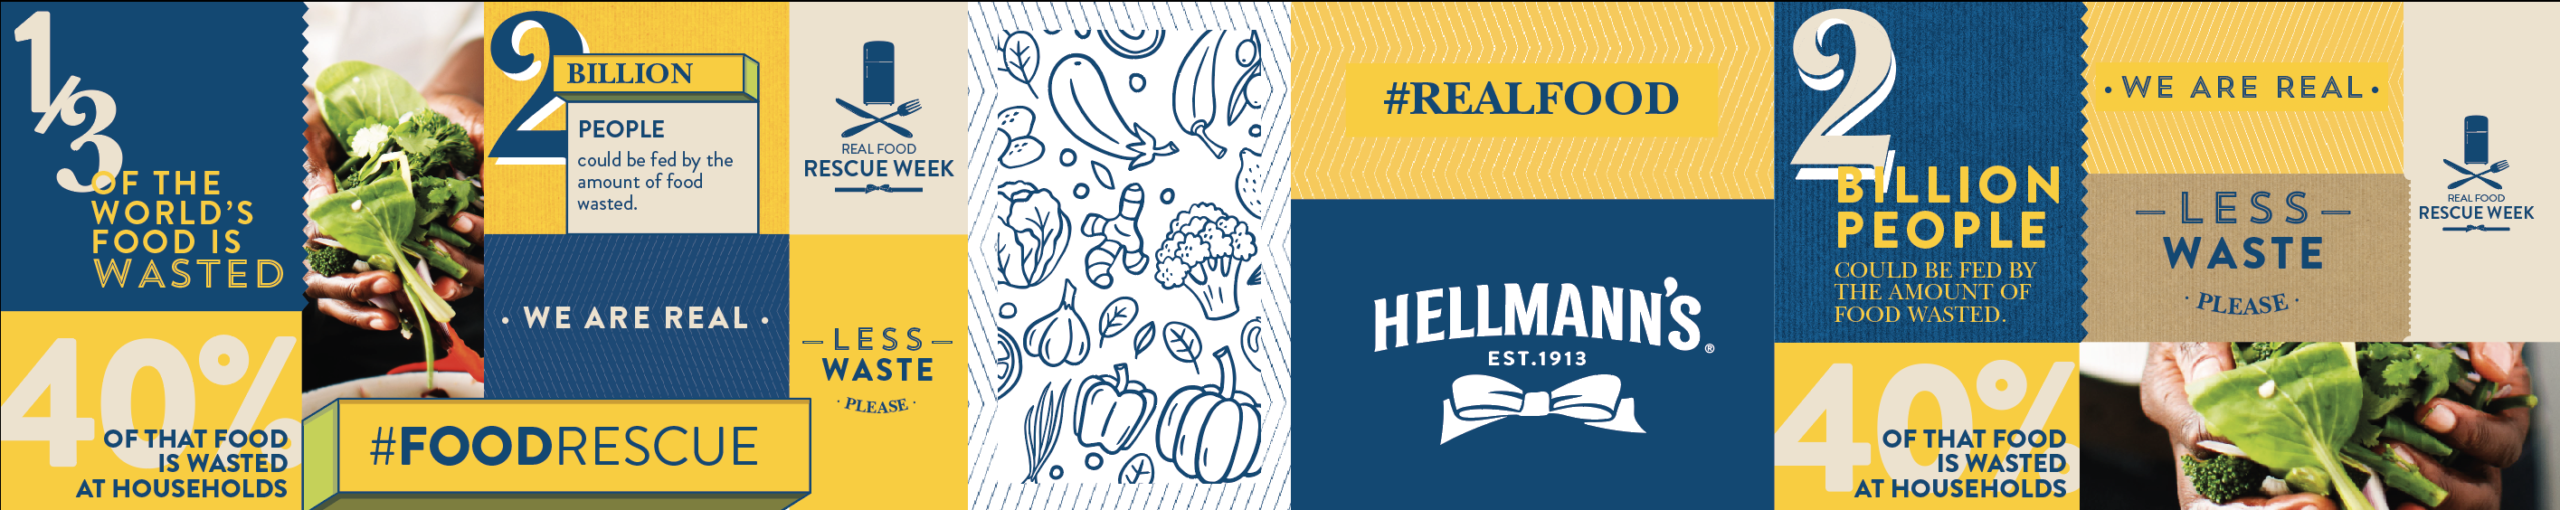 HELLMANS-REALFOODRESCUEWEEK-STATIONS-BYOF